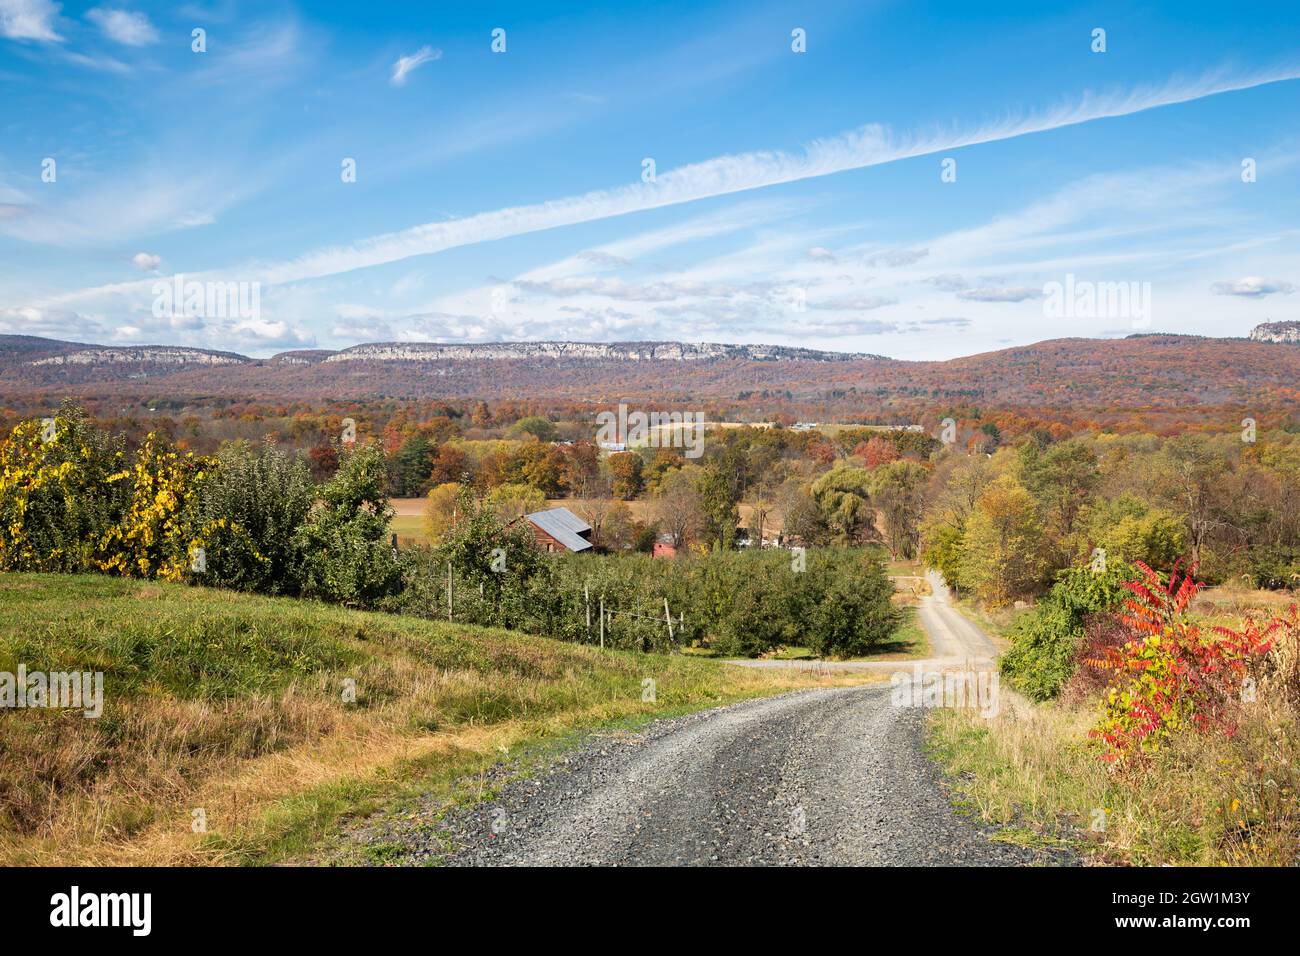 Beautiful autumn day in Ulster County New York with the Shawangunk Mountains, a popular climbing destination in the background. Stock Photo